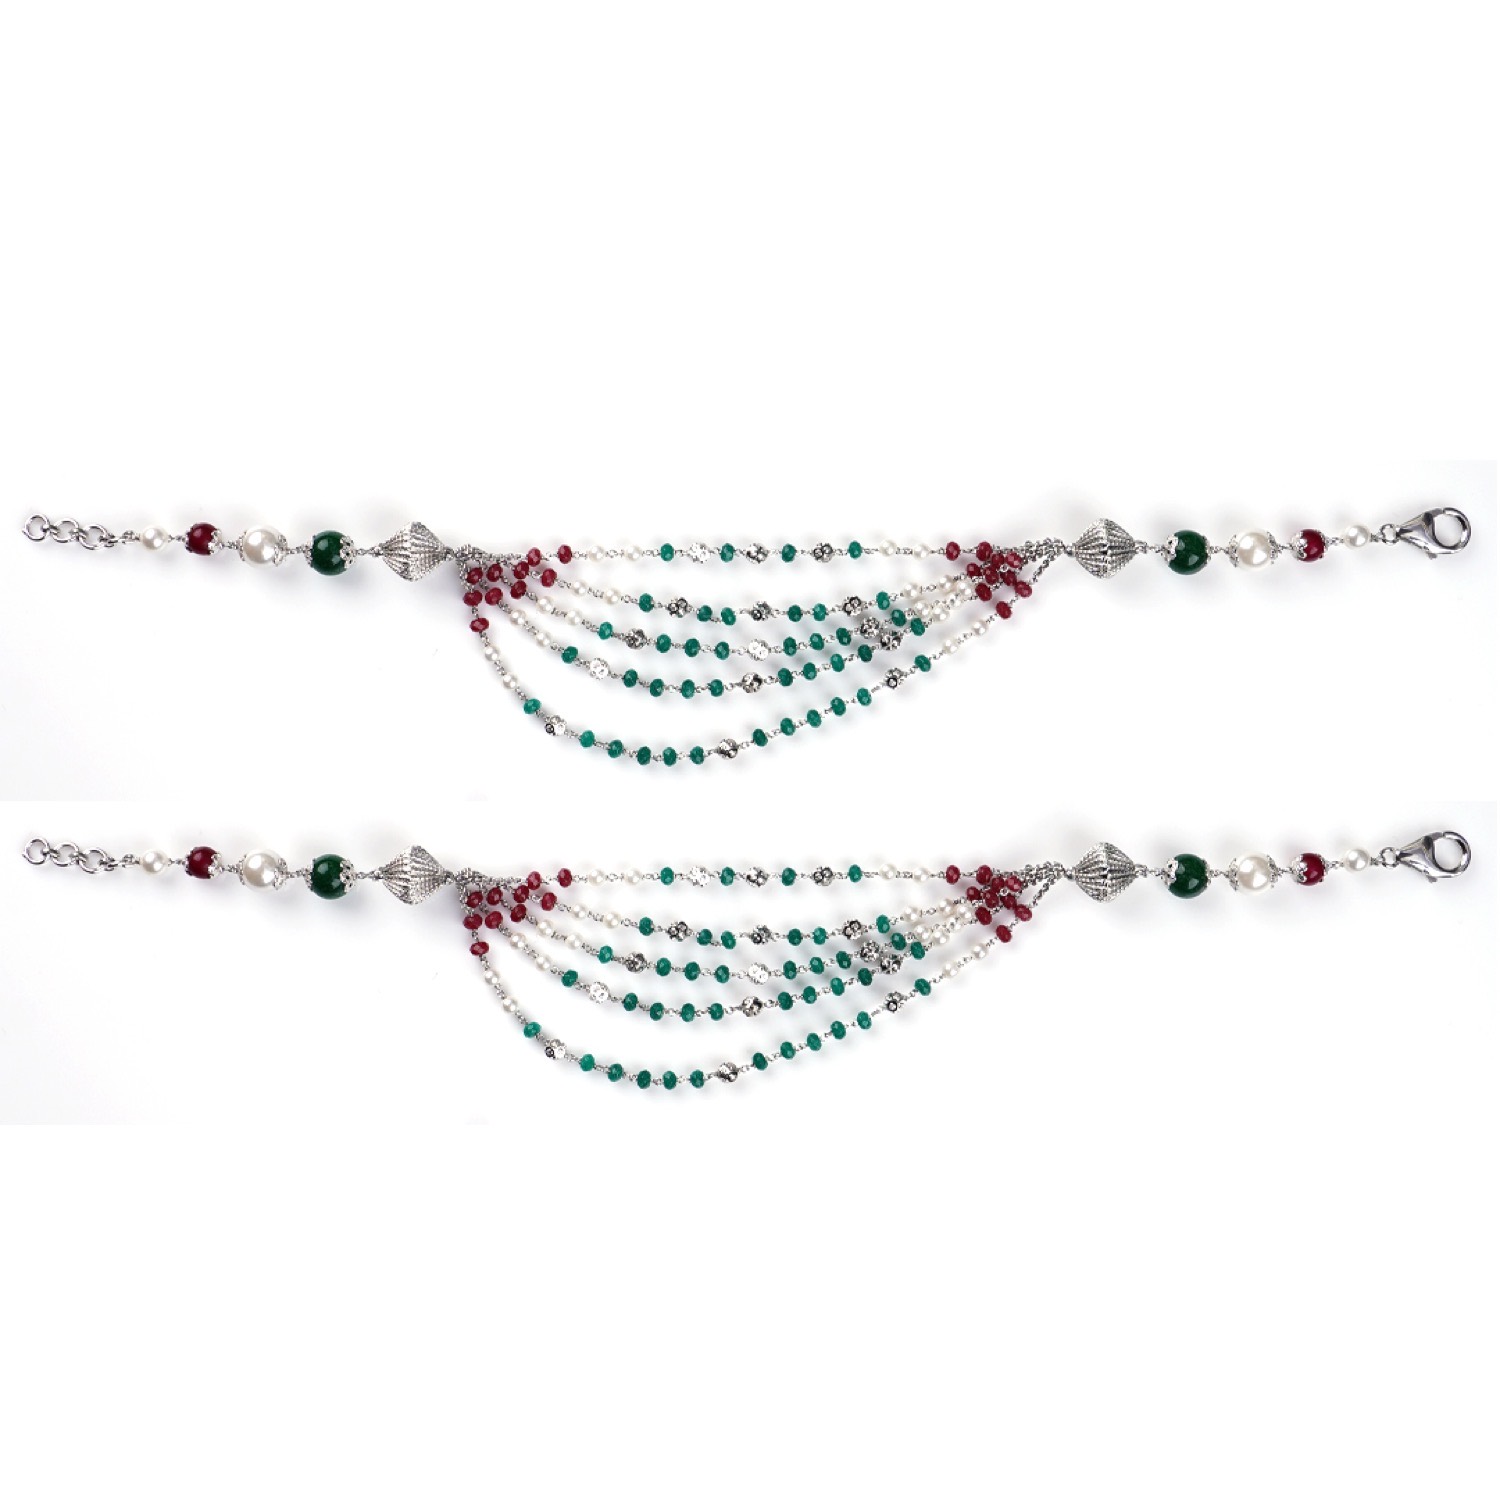 varam_anklets_072022_green_and_red_stone_silver_anklets_011-1